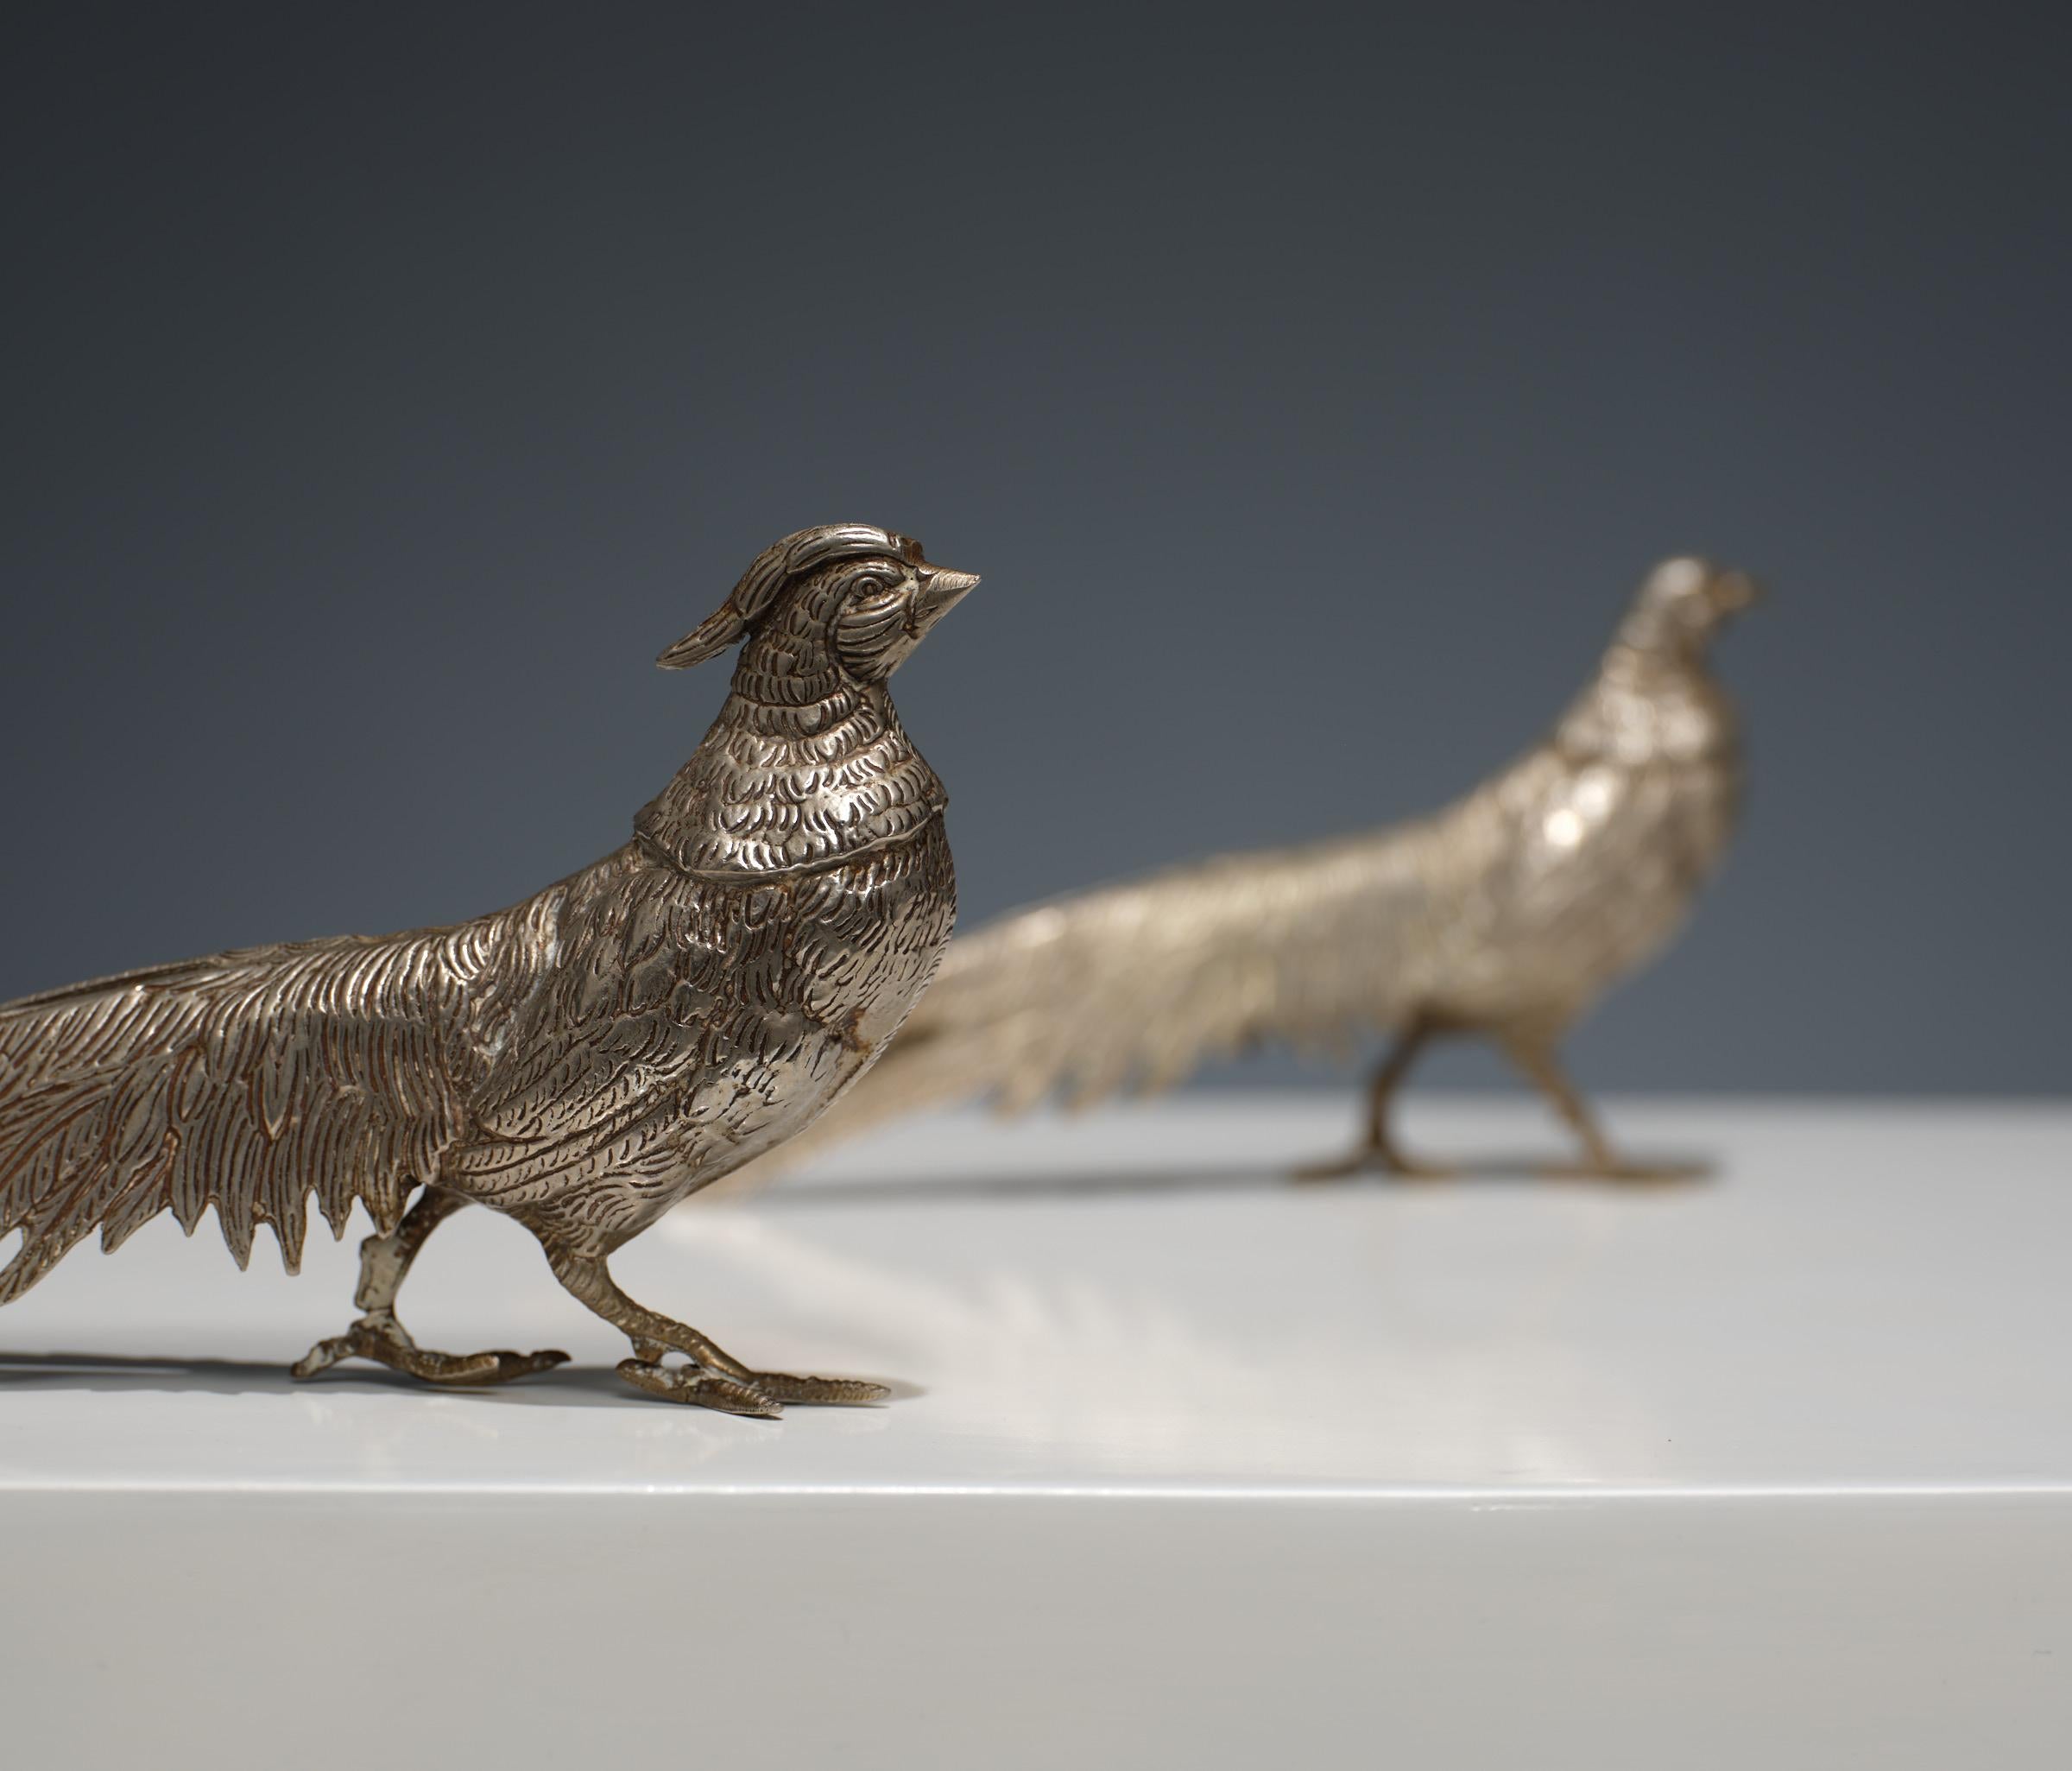 This pair of 1950s Italian silver pheasants is a testament to the elegance and timelessness of Italian design during the mid-century era.

Mid-Century Italian Design: These silver pheasants reflect the sophistication and artistic flair of Italian